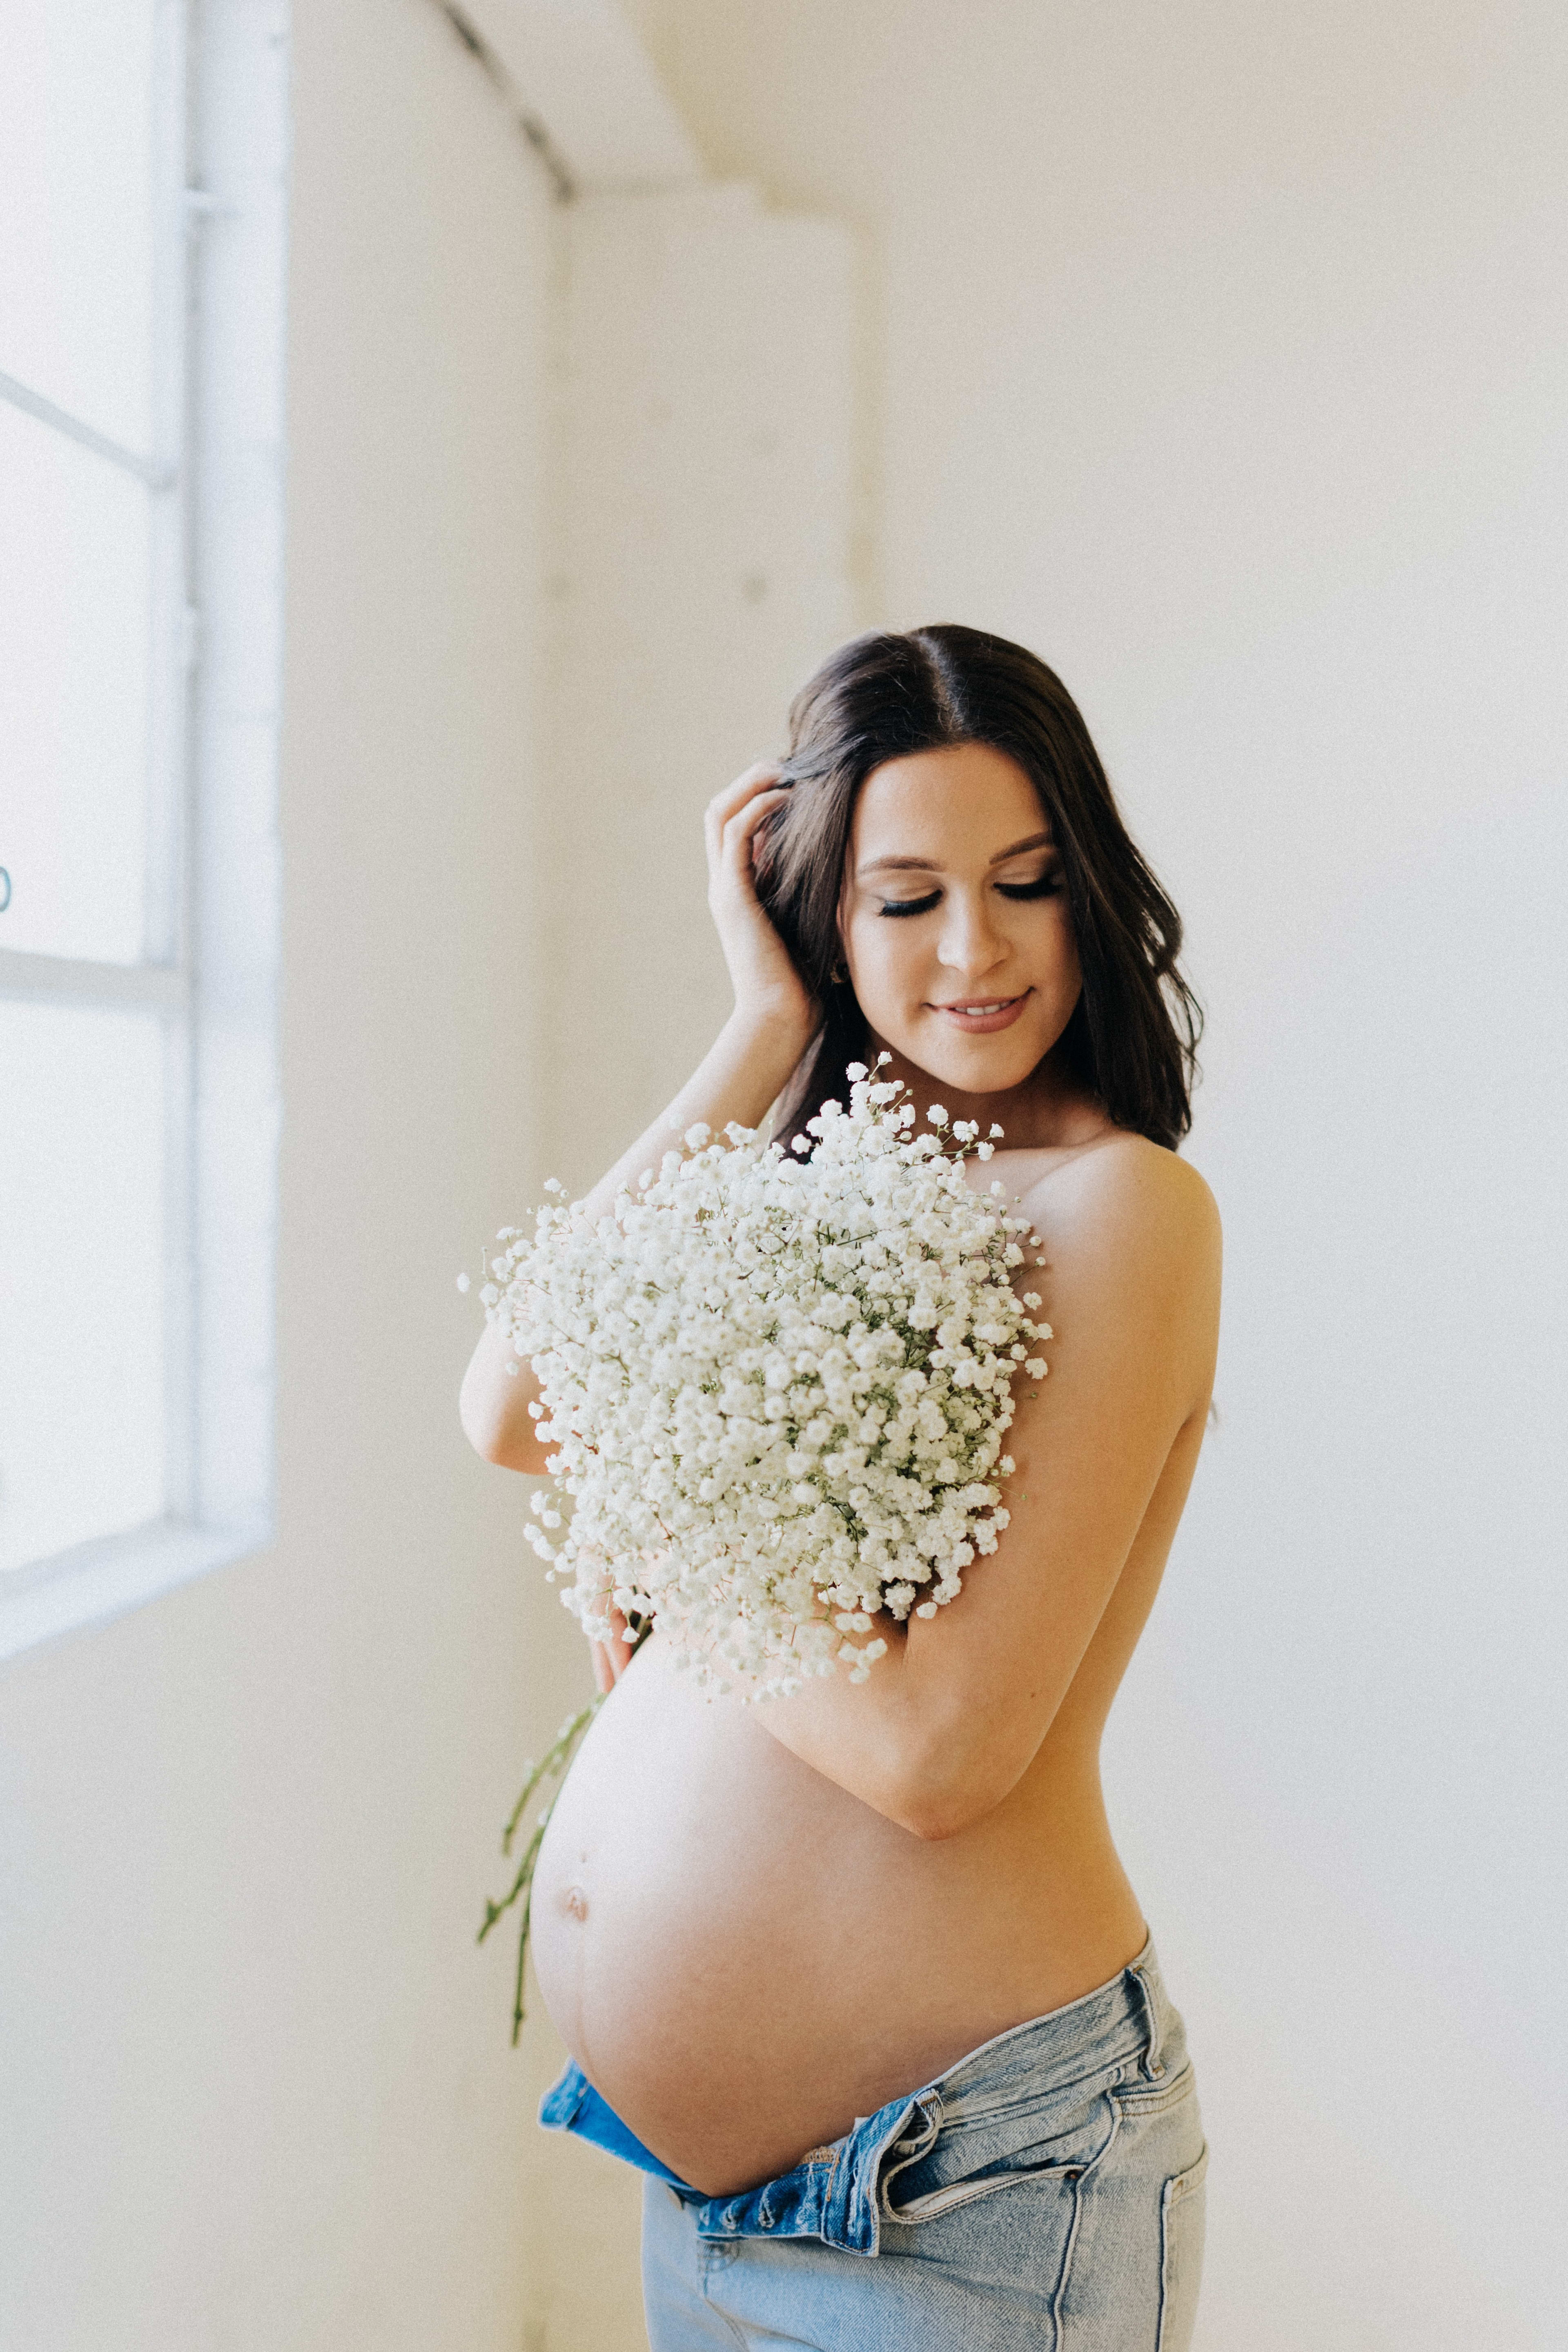 A maternity photoshoot with a pregnant woman holding white flowers.